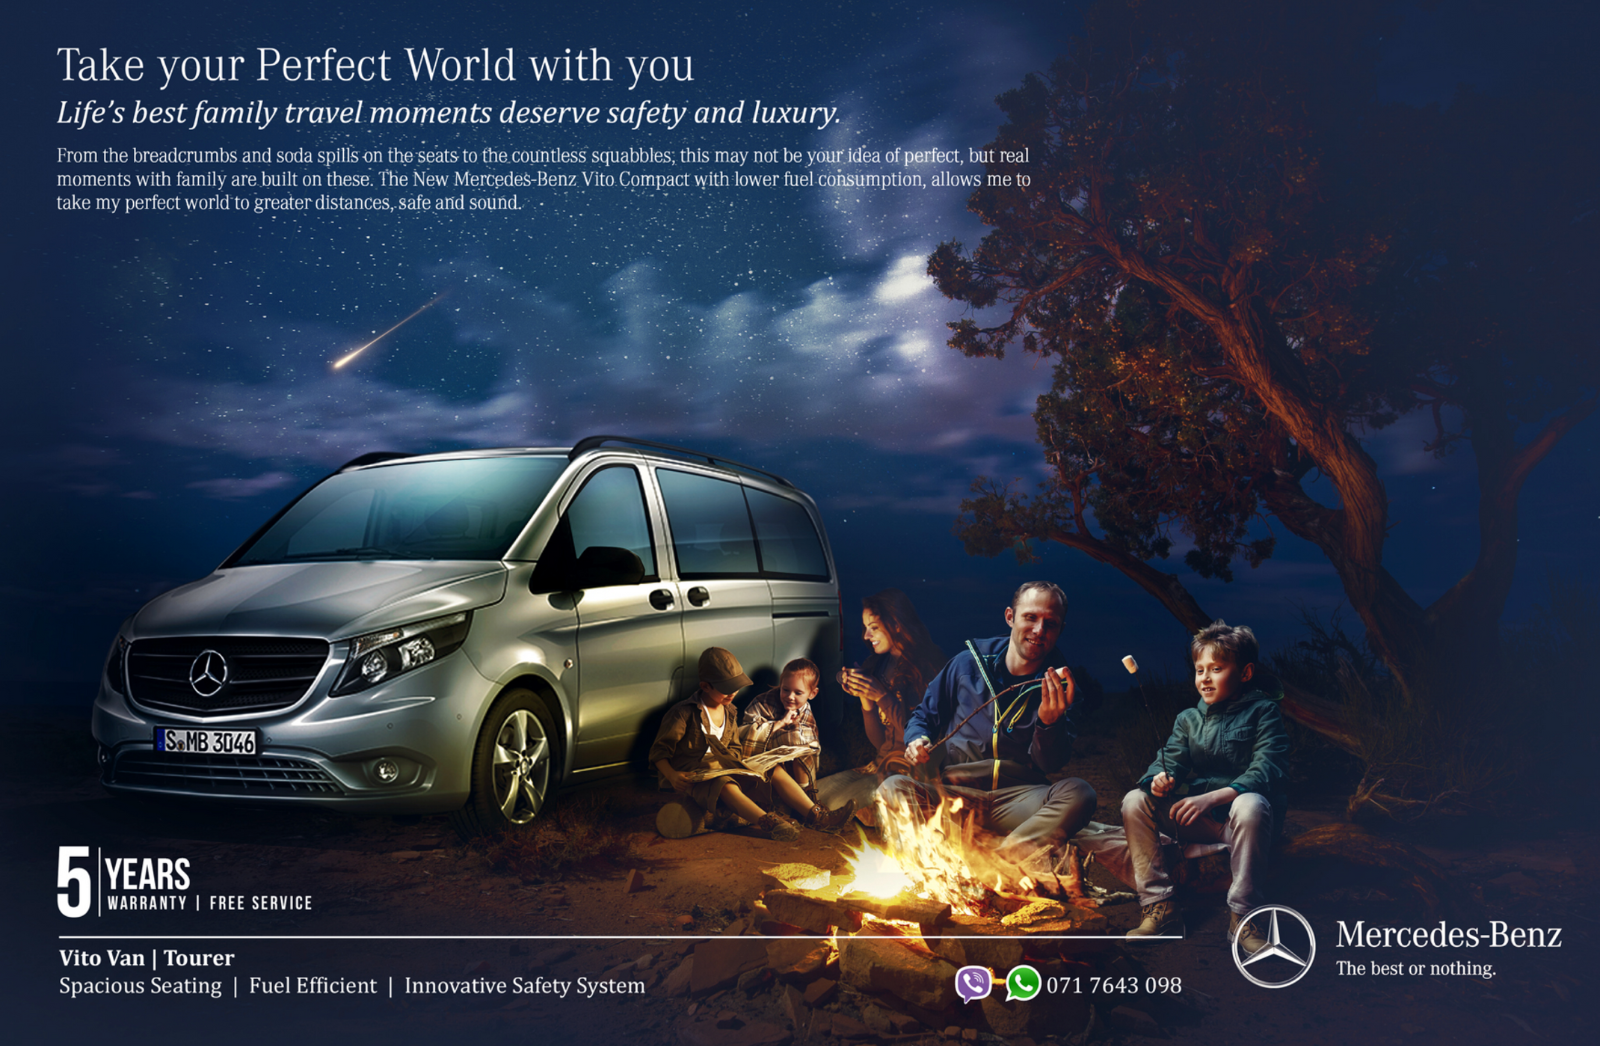 MERCEDES : Take Your Perfect World With You